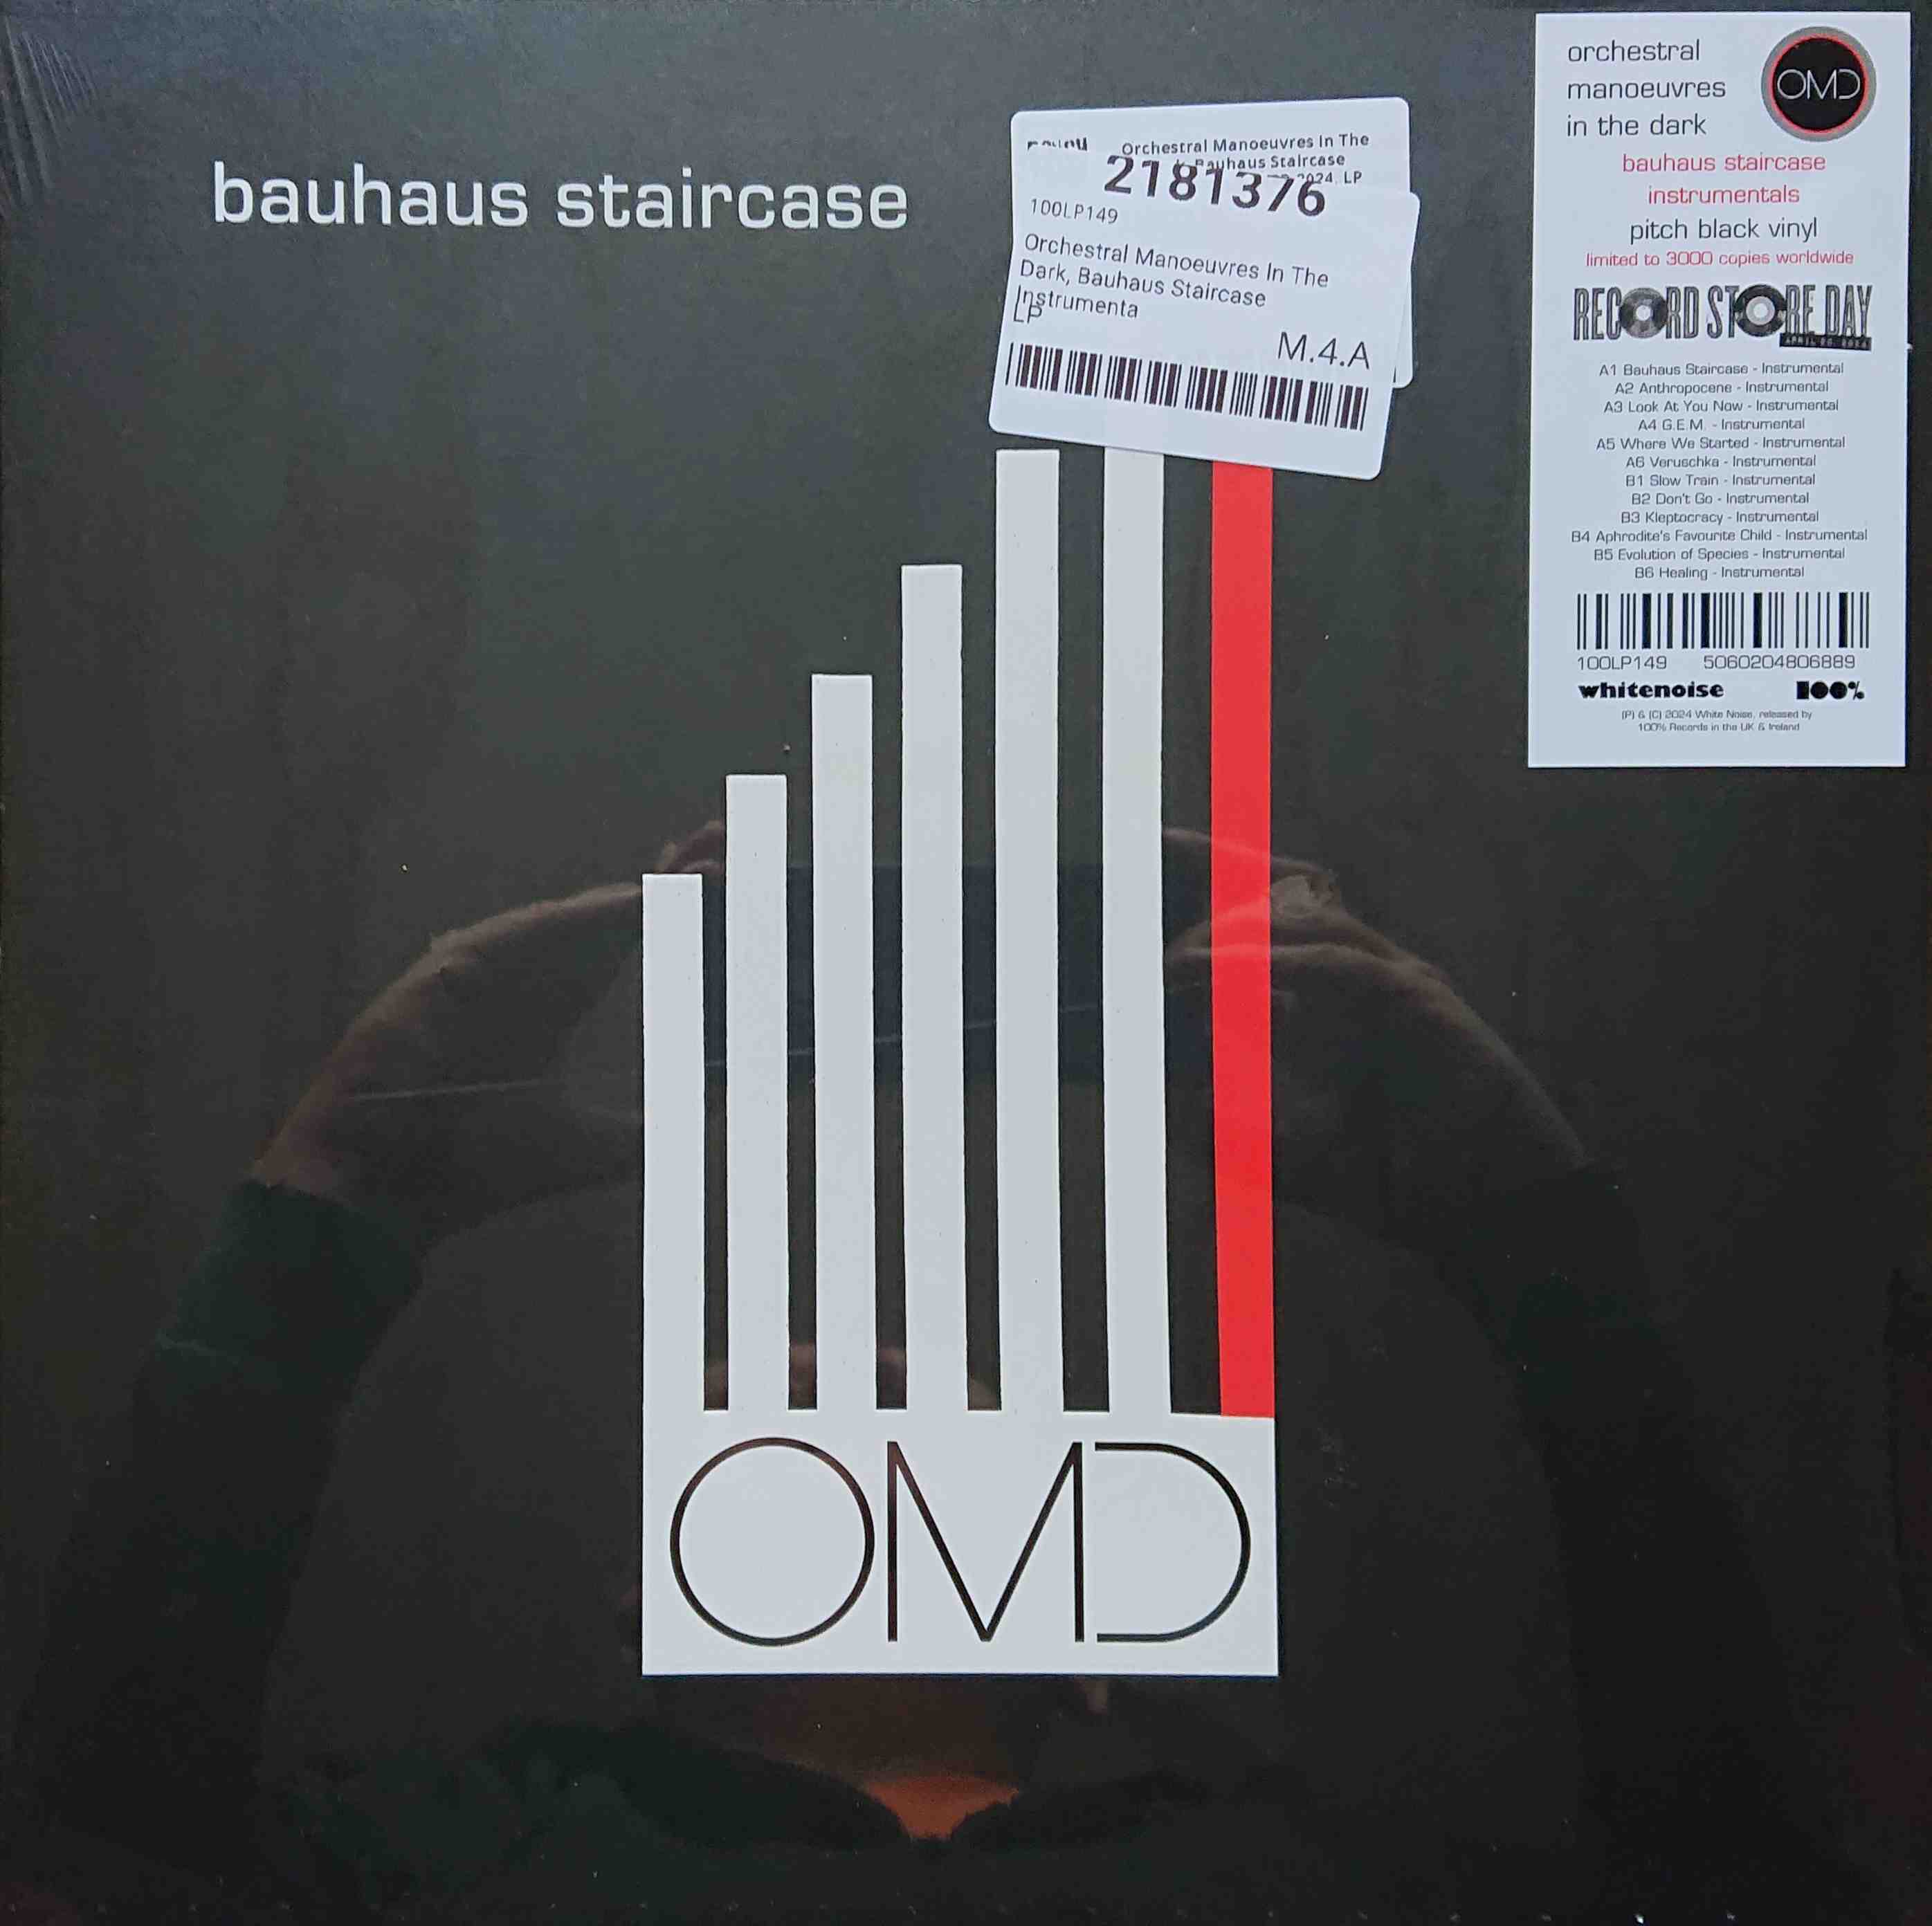 Picture of 100LP149 Bauhaus staircase by artist Orchestral Manoeuvres in the Dark (OMD)